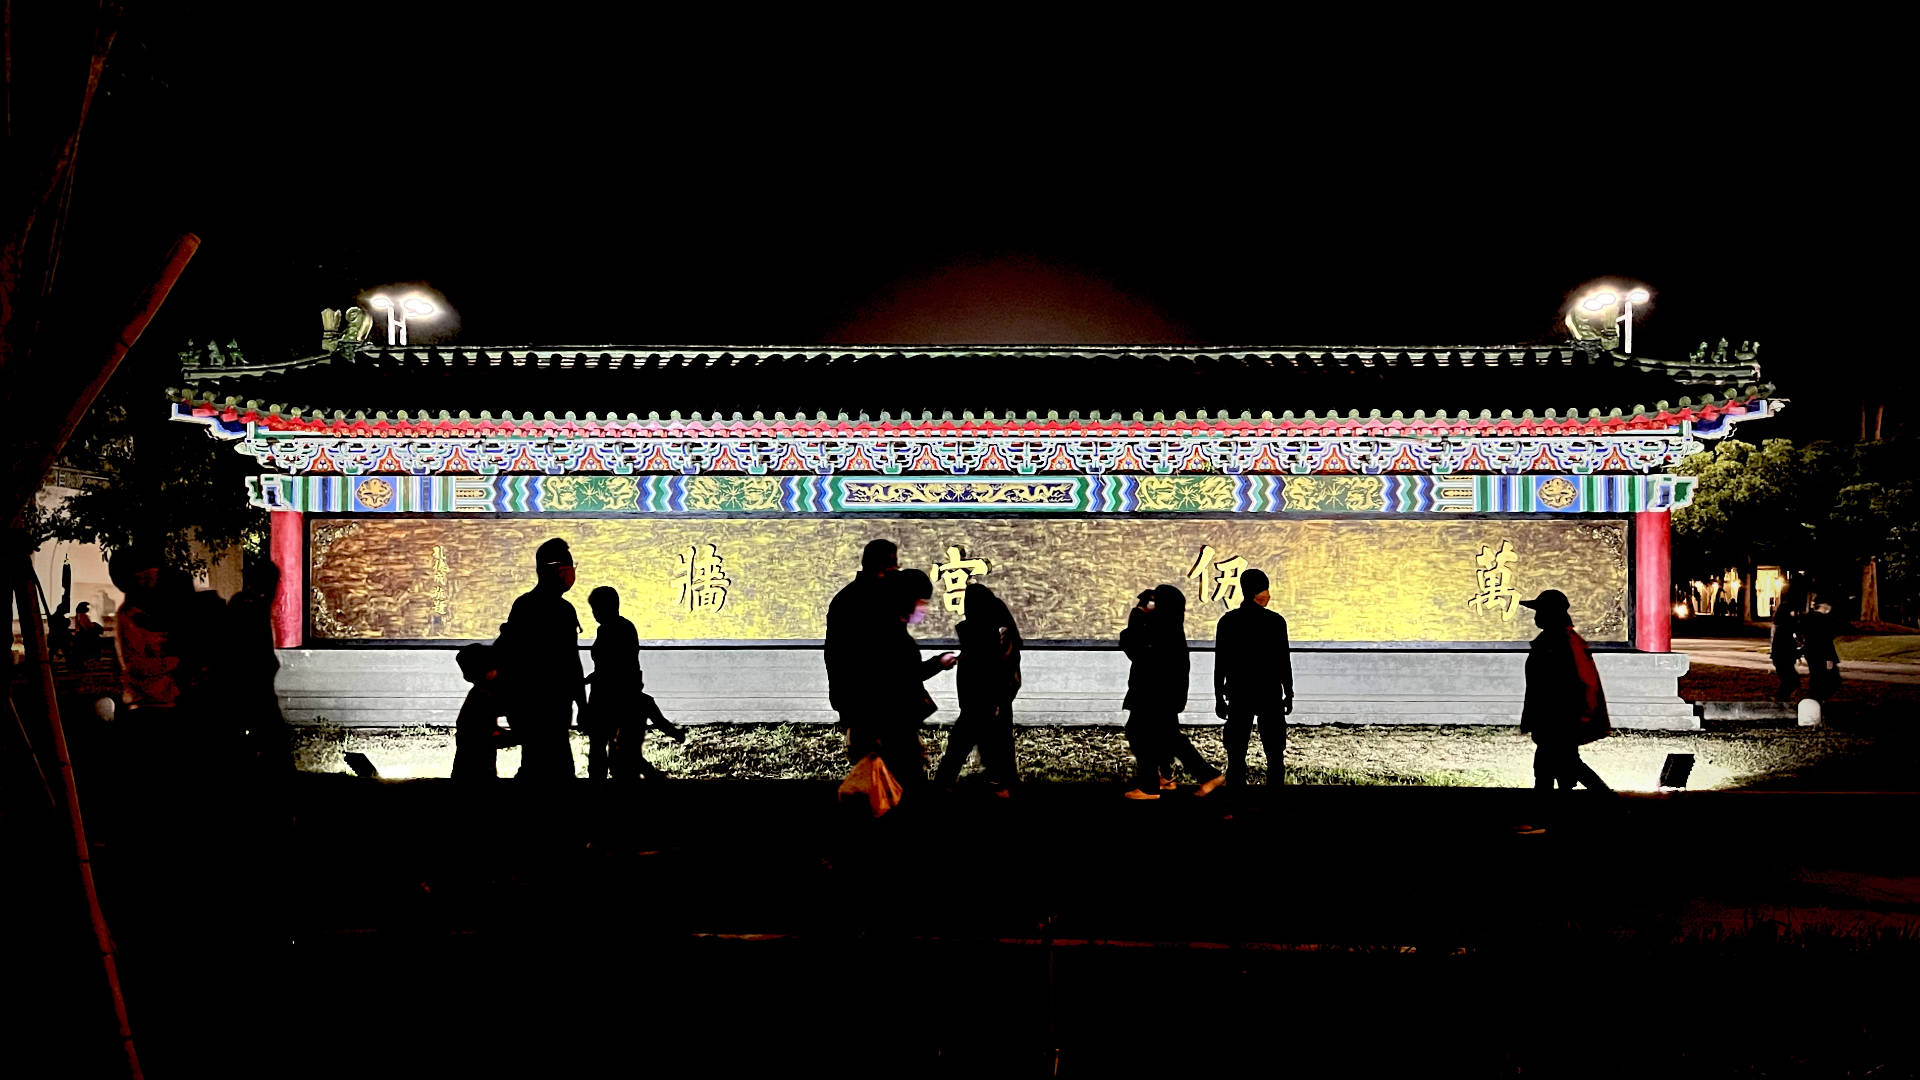  Pedestrians silhouetted against a colorful temple wall.